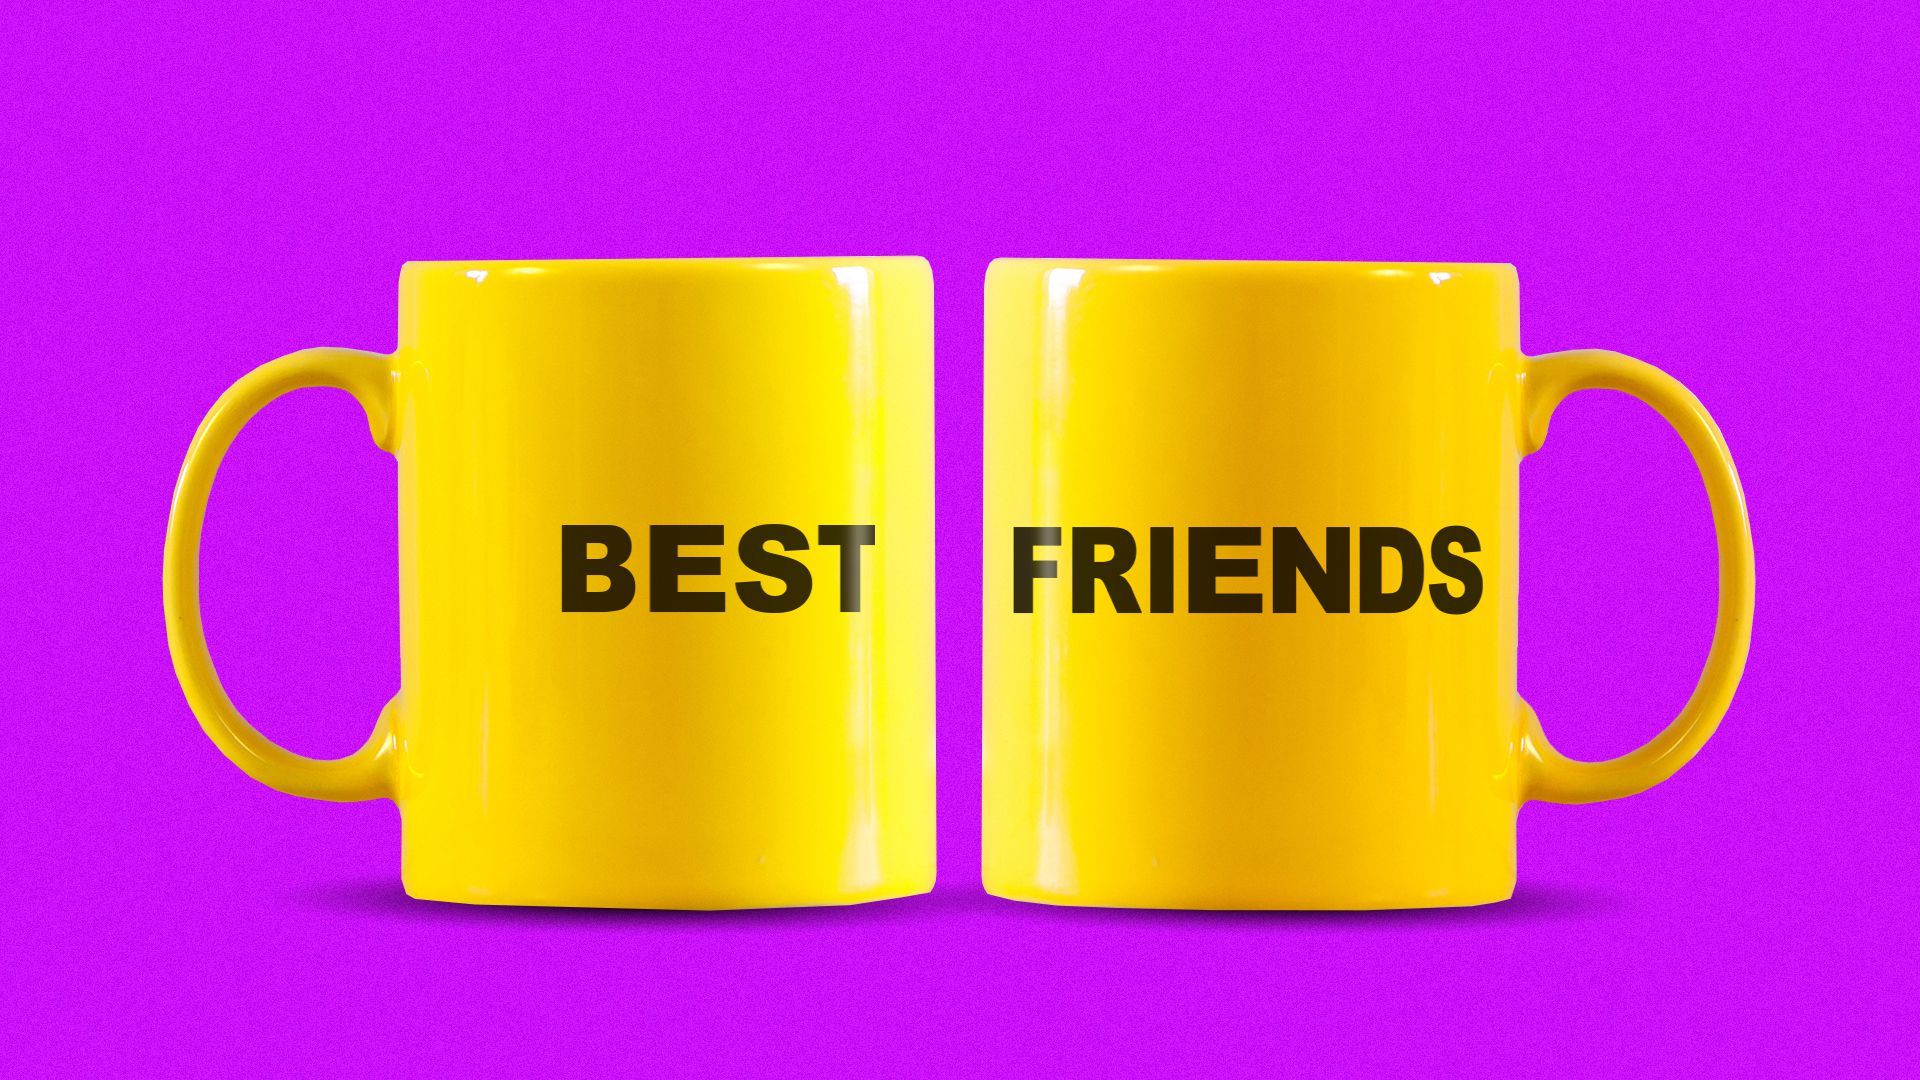 Illustration of two mugs, one with the word 